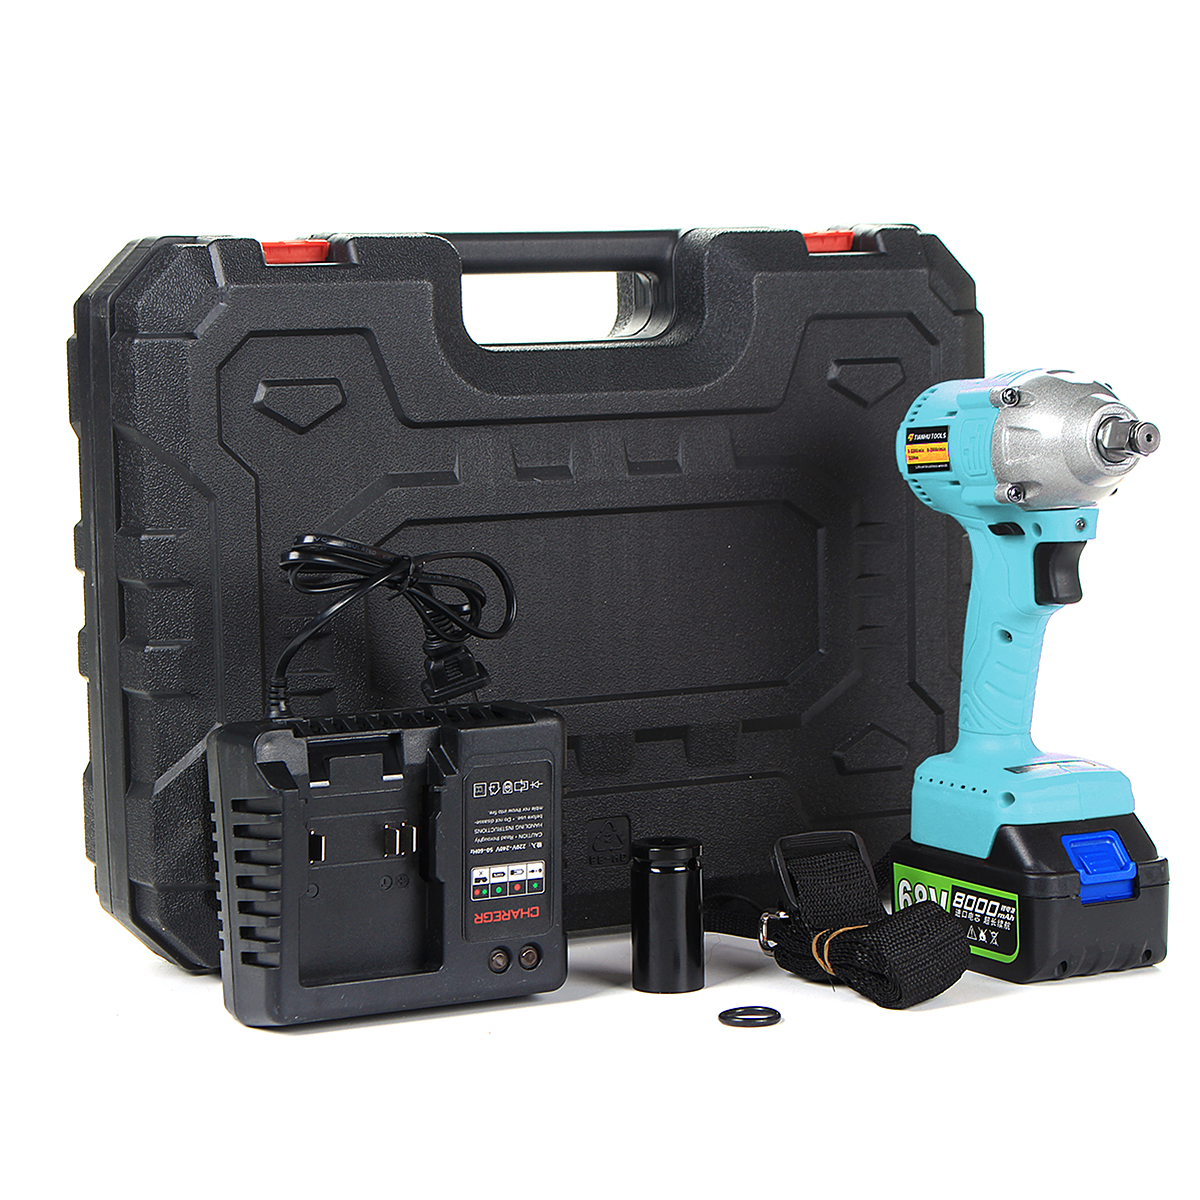 8000mAh-68V-Lithium-Ion-Brushless-Cordless-High-Torque-Square-Drive-Impact-Wrench-1262426-8